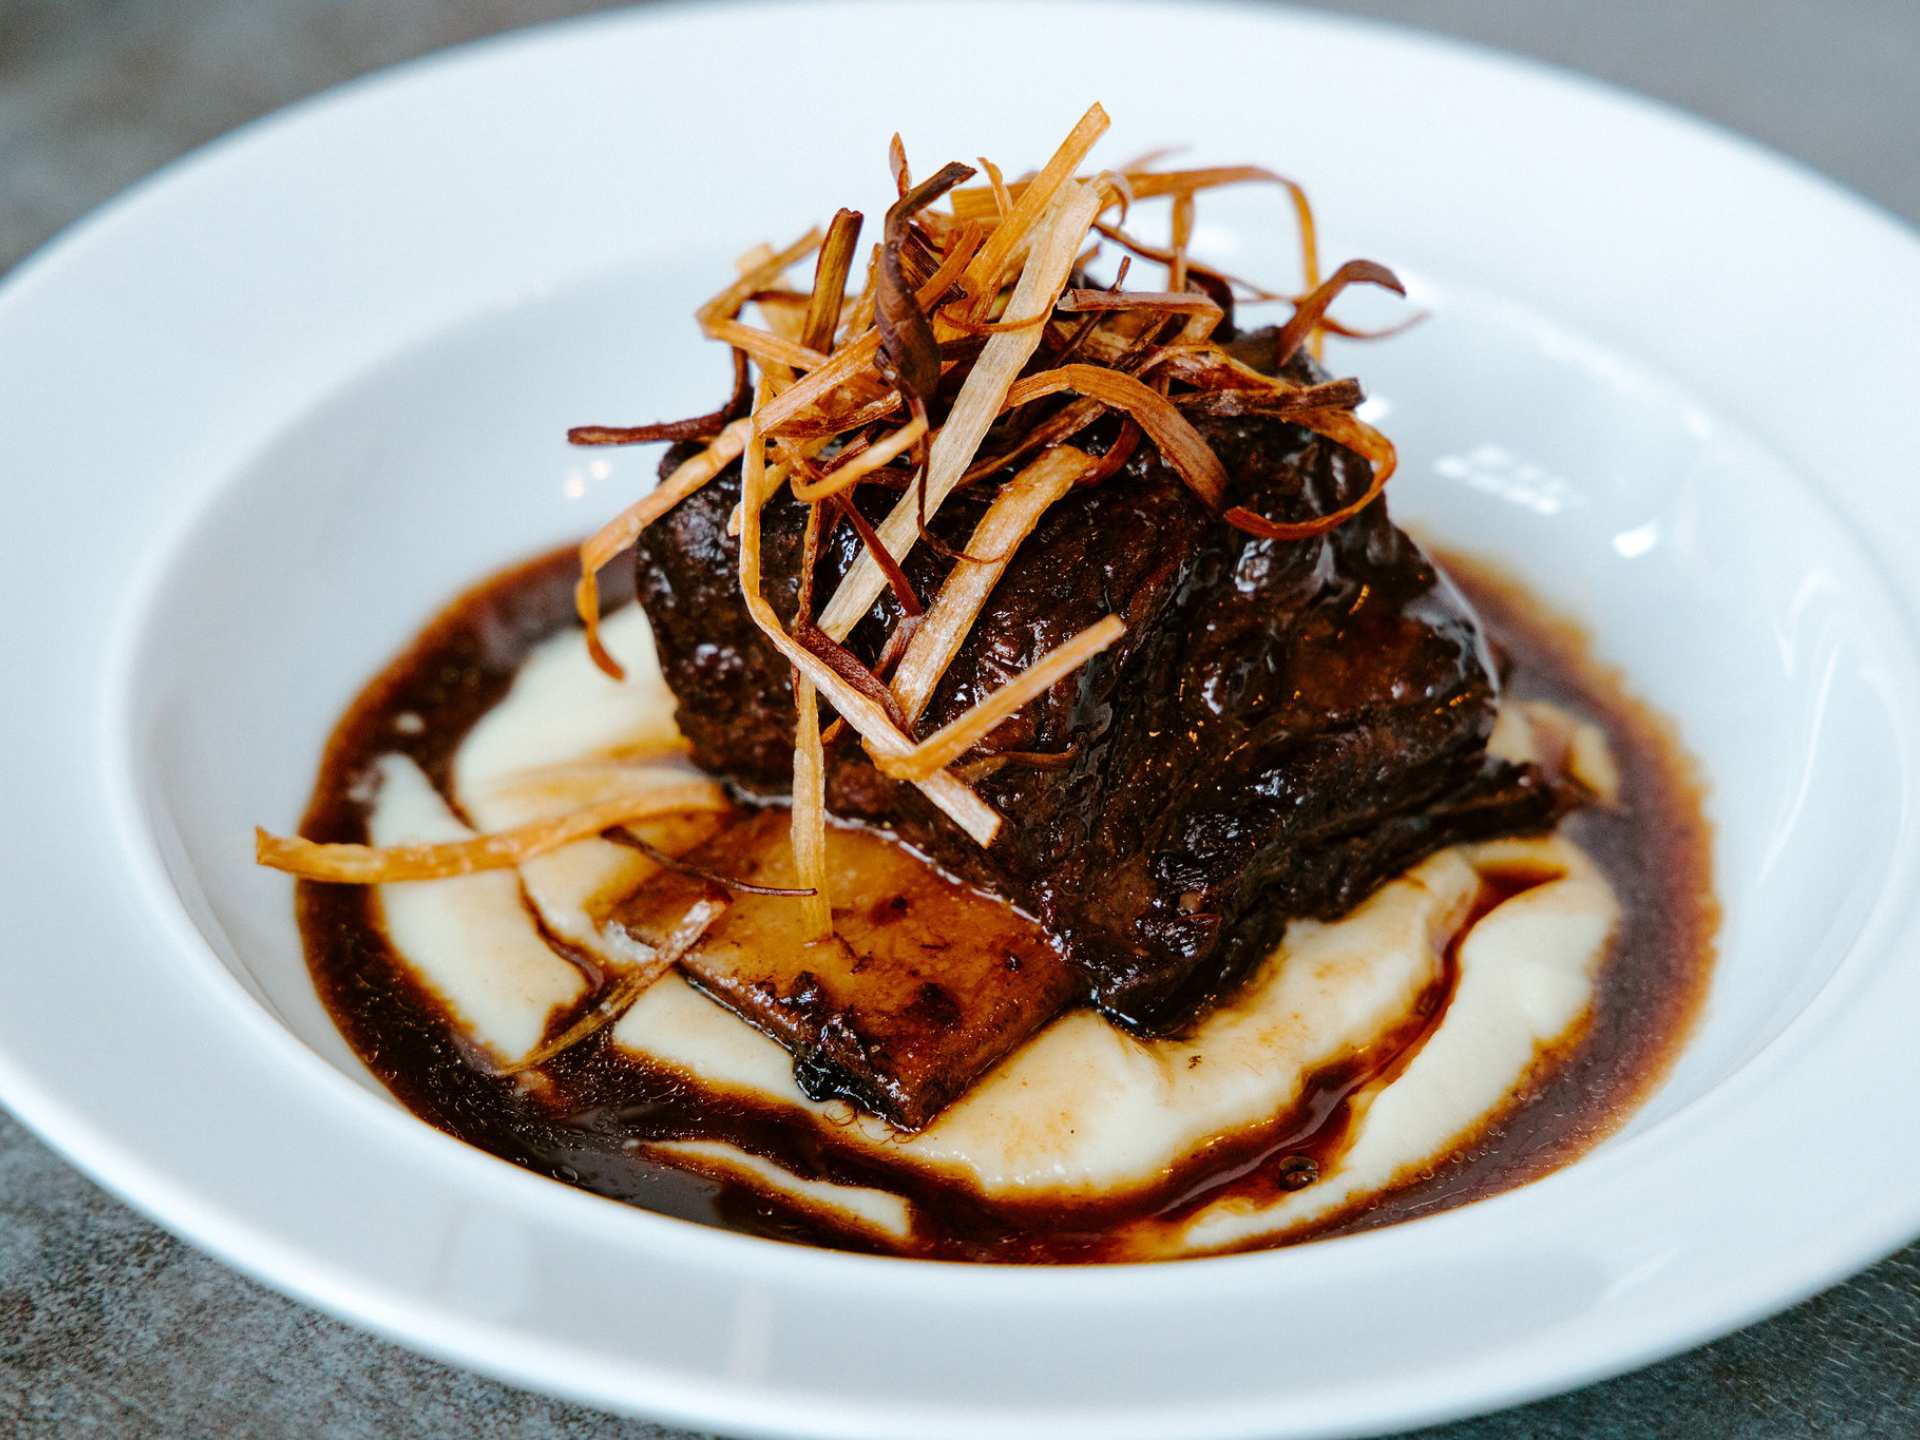 The Henderson hotel | Short ribs beautifully plated at The Henderson hotel